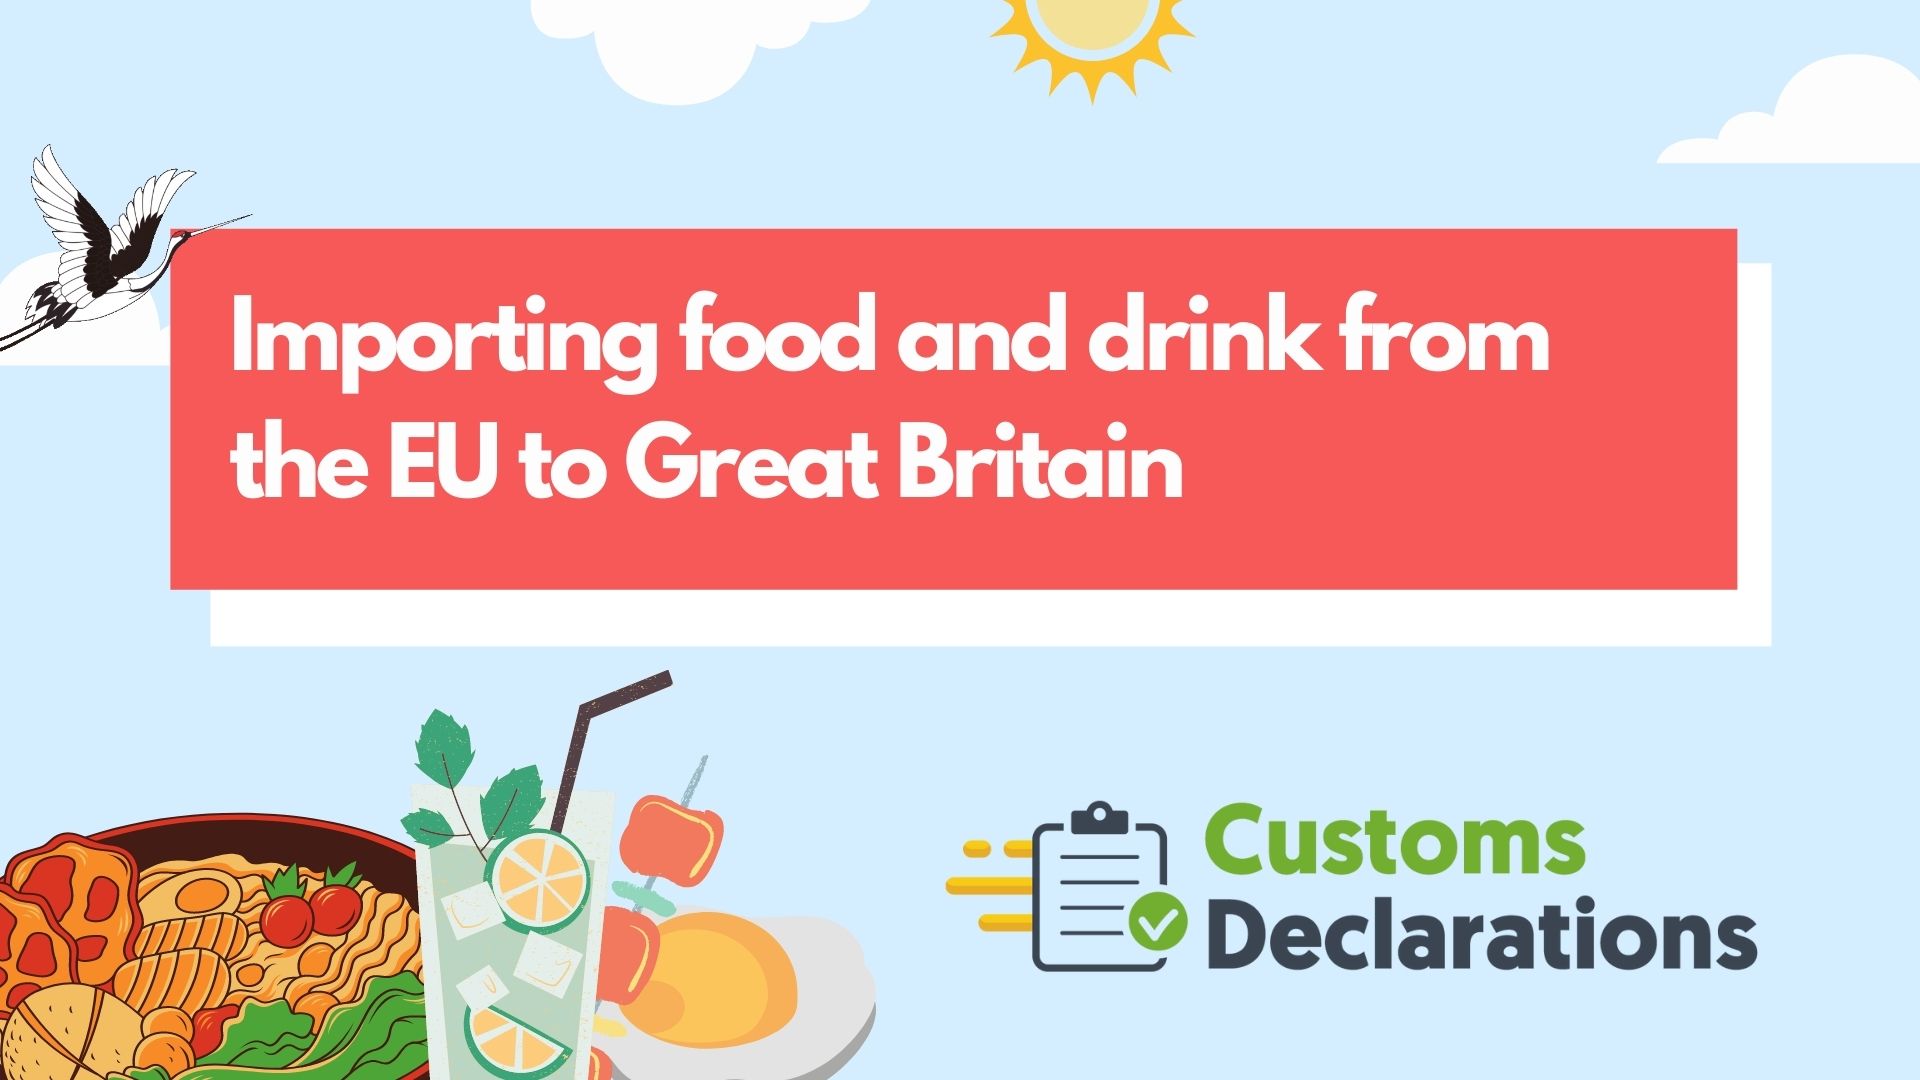 A quick guide to importing food and drink from the EU to Great Britain